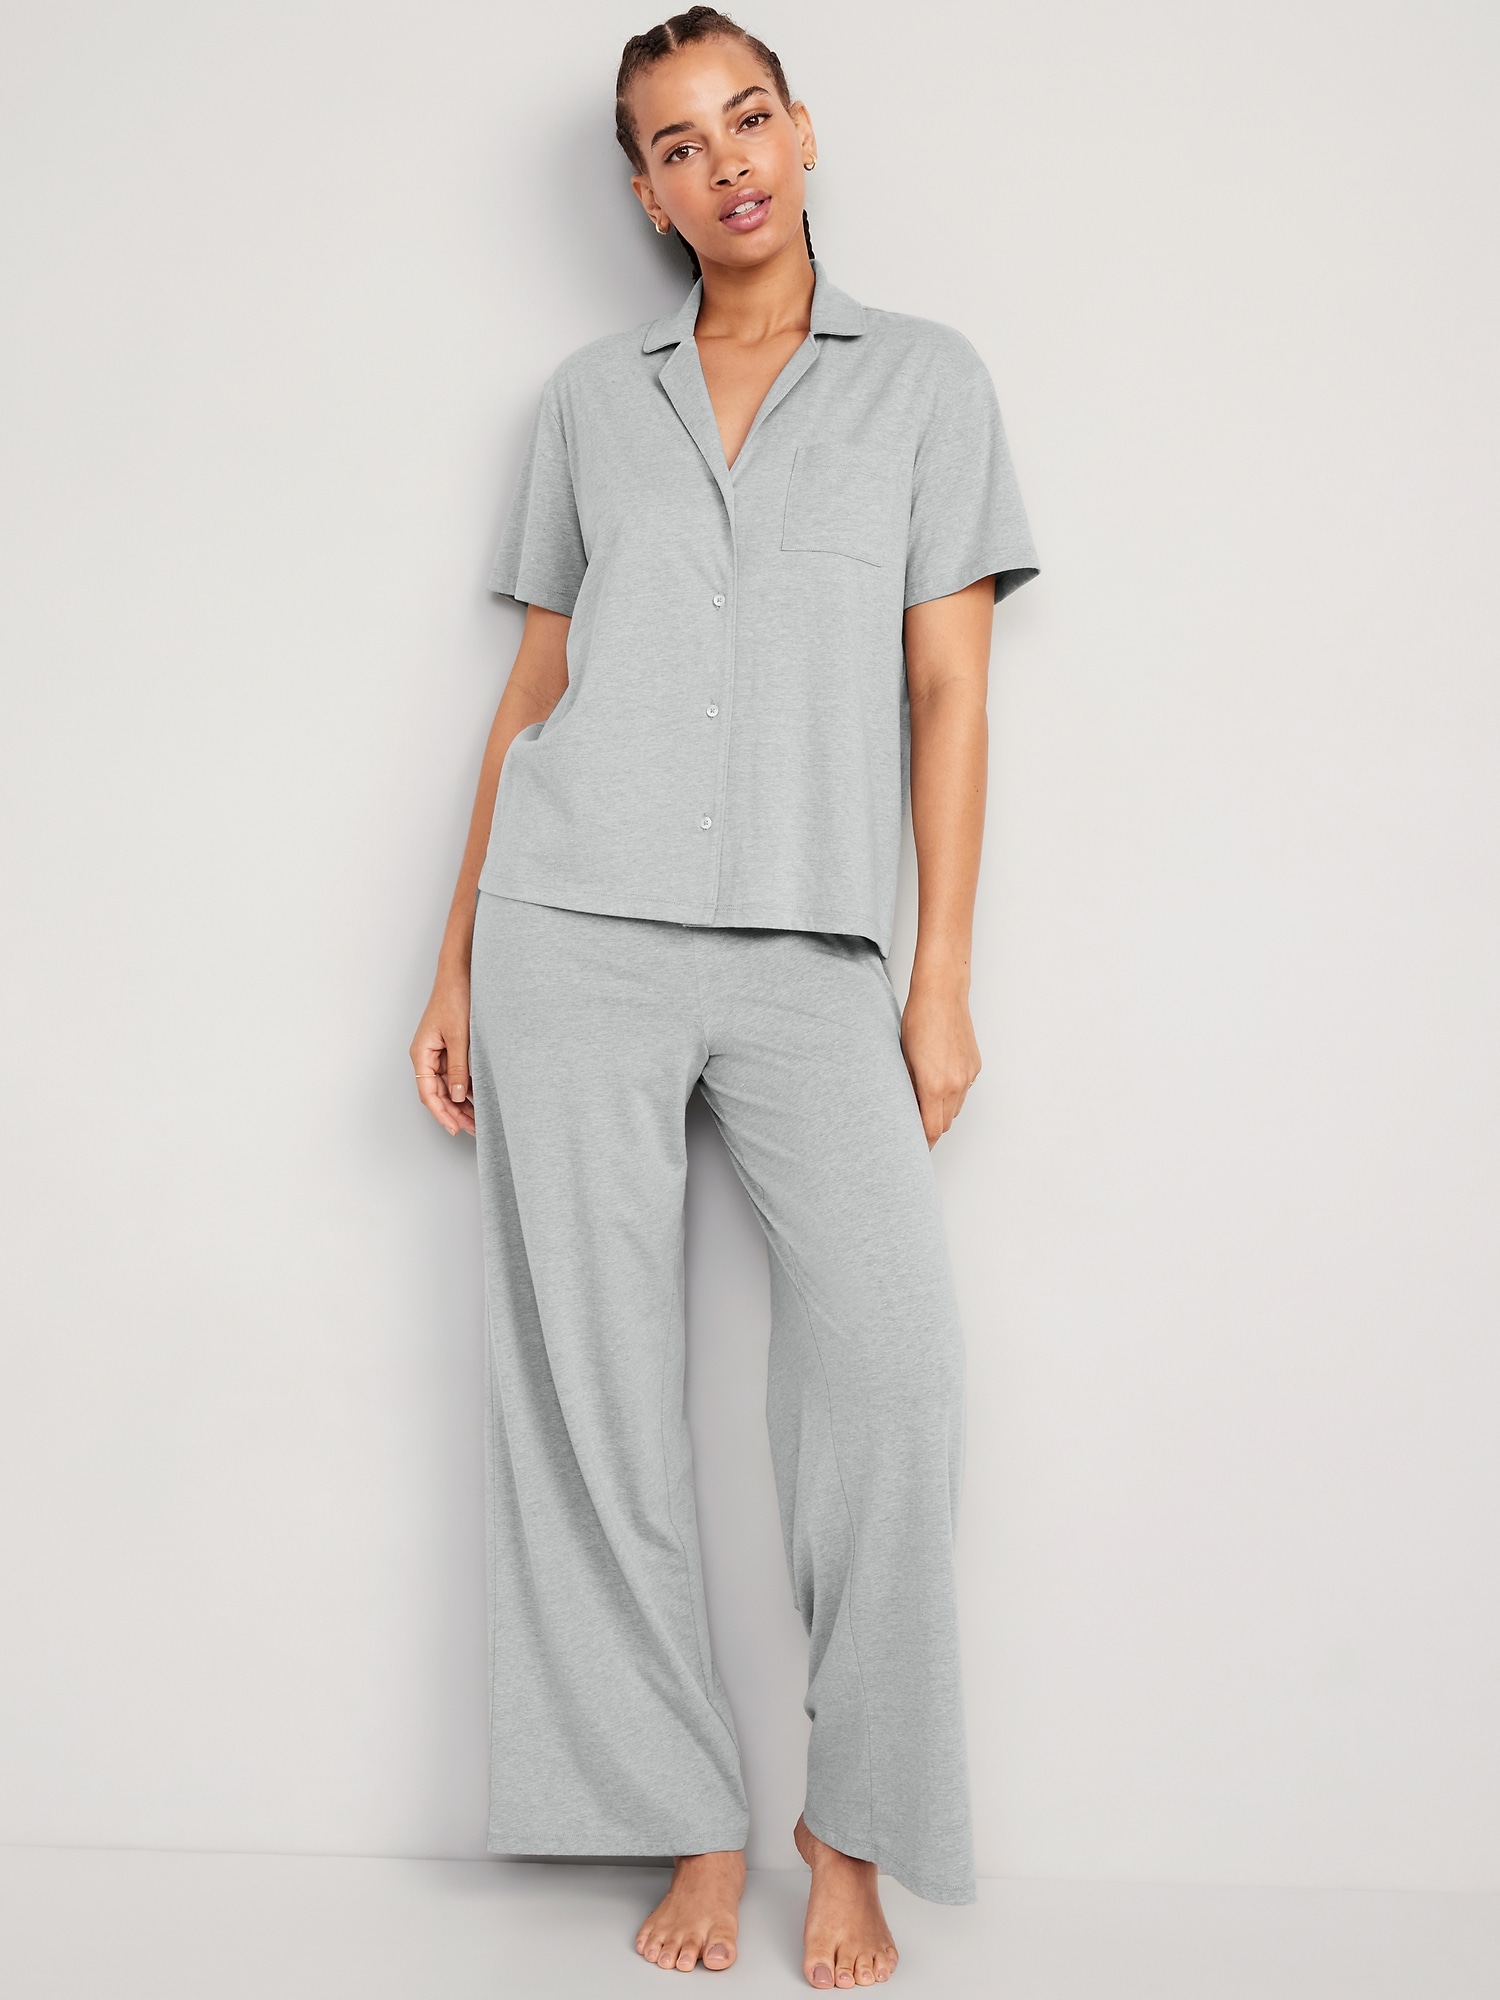 “From Bedroom to Brunch: How to Style Pajama Sets for Daytime Wear”